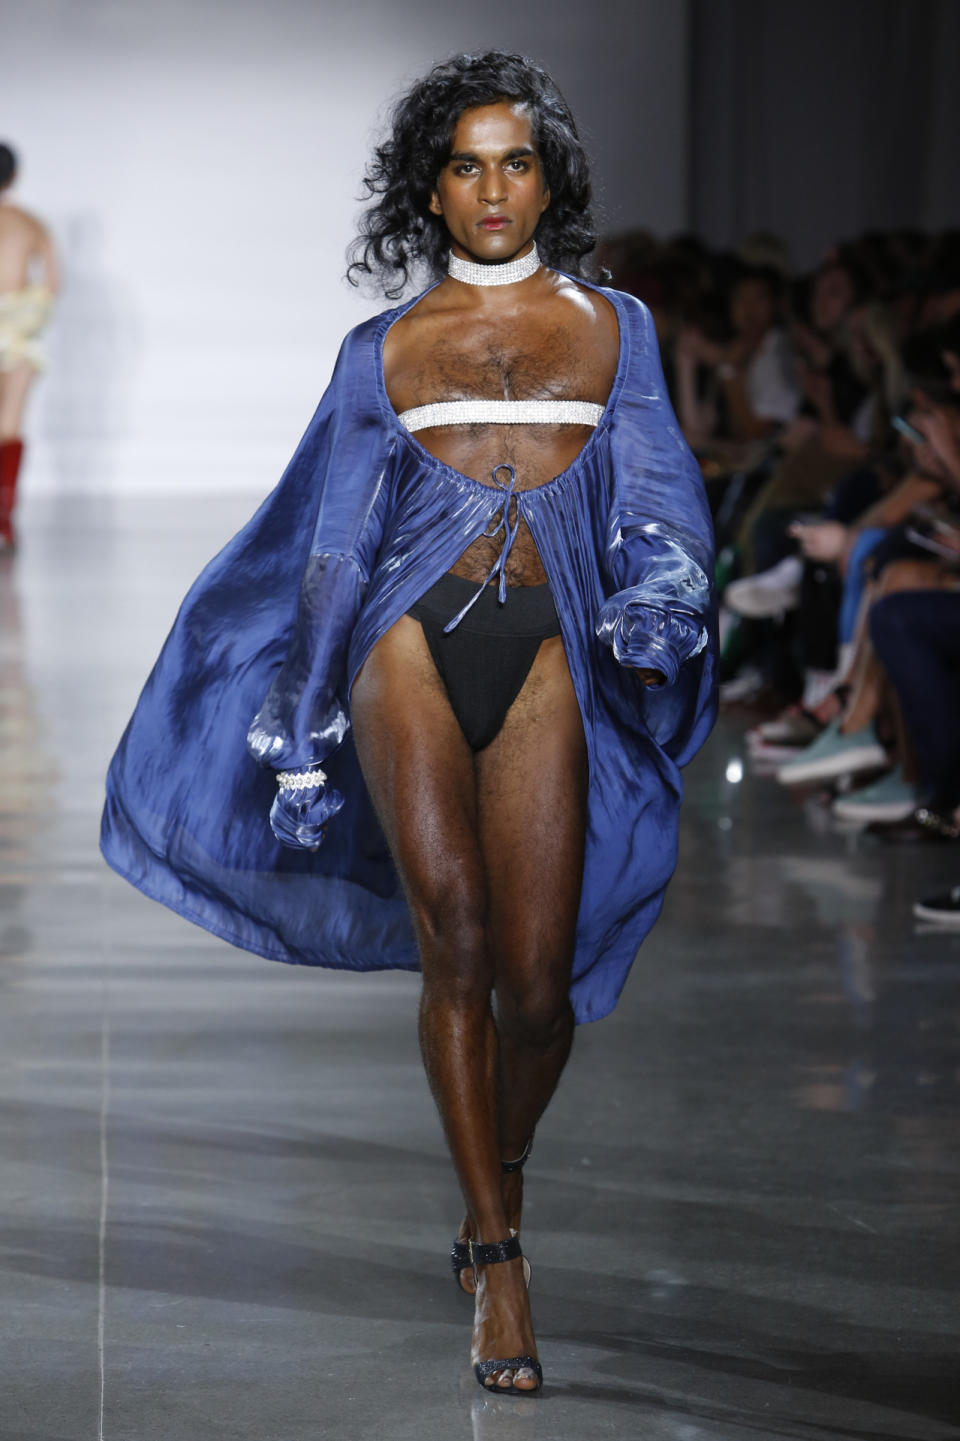 Model with Blue Cape and Heels by Moses Gauntlett Cheng